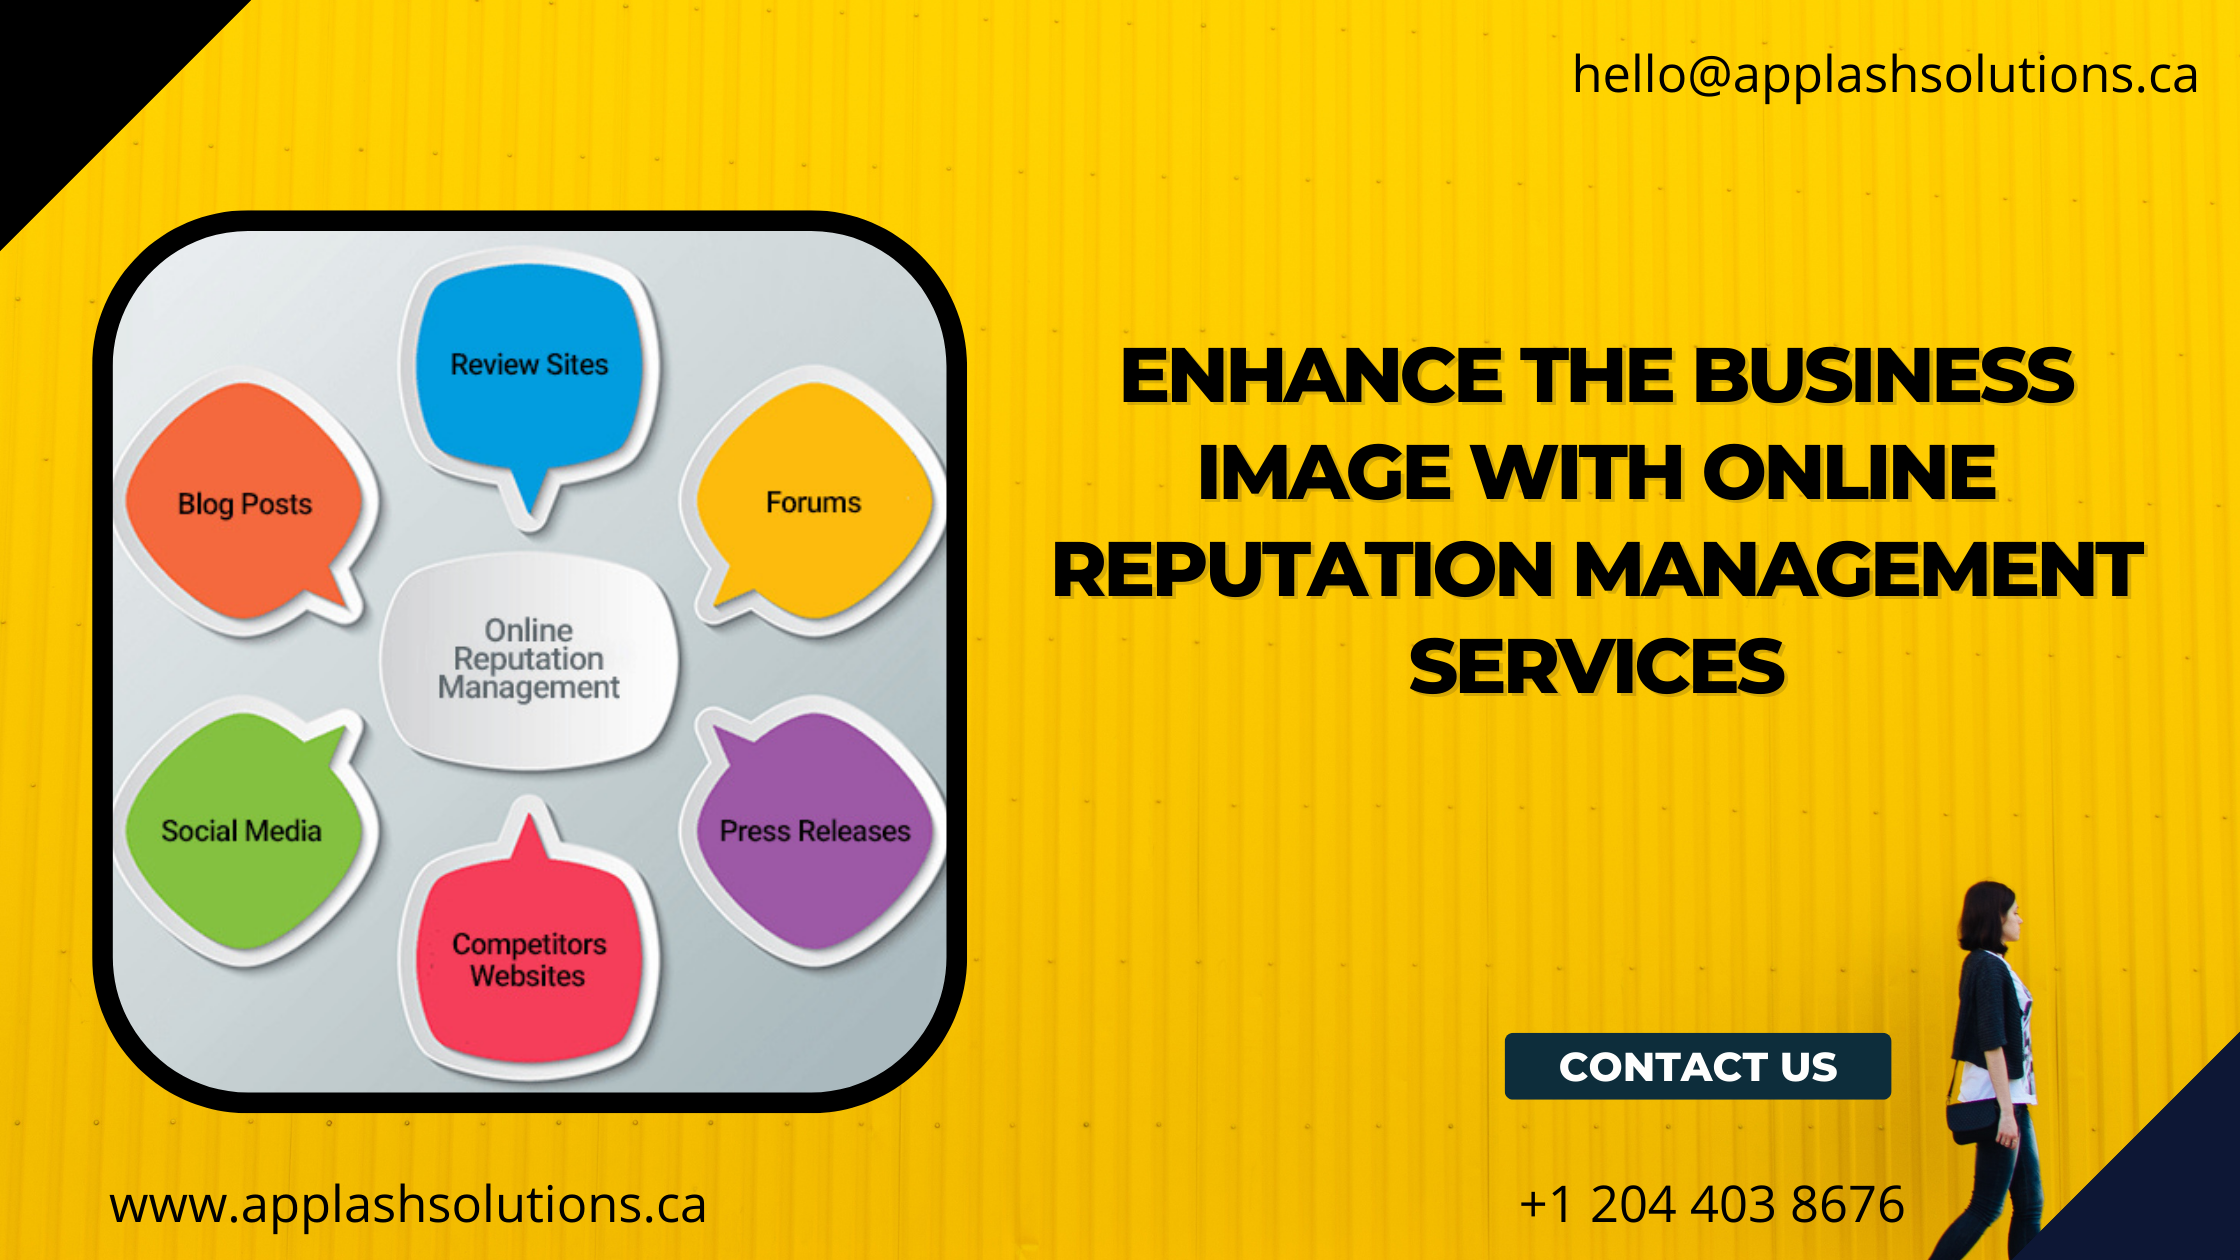 Enhance the Business Image with Online Reputation Management Services